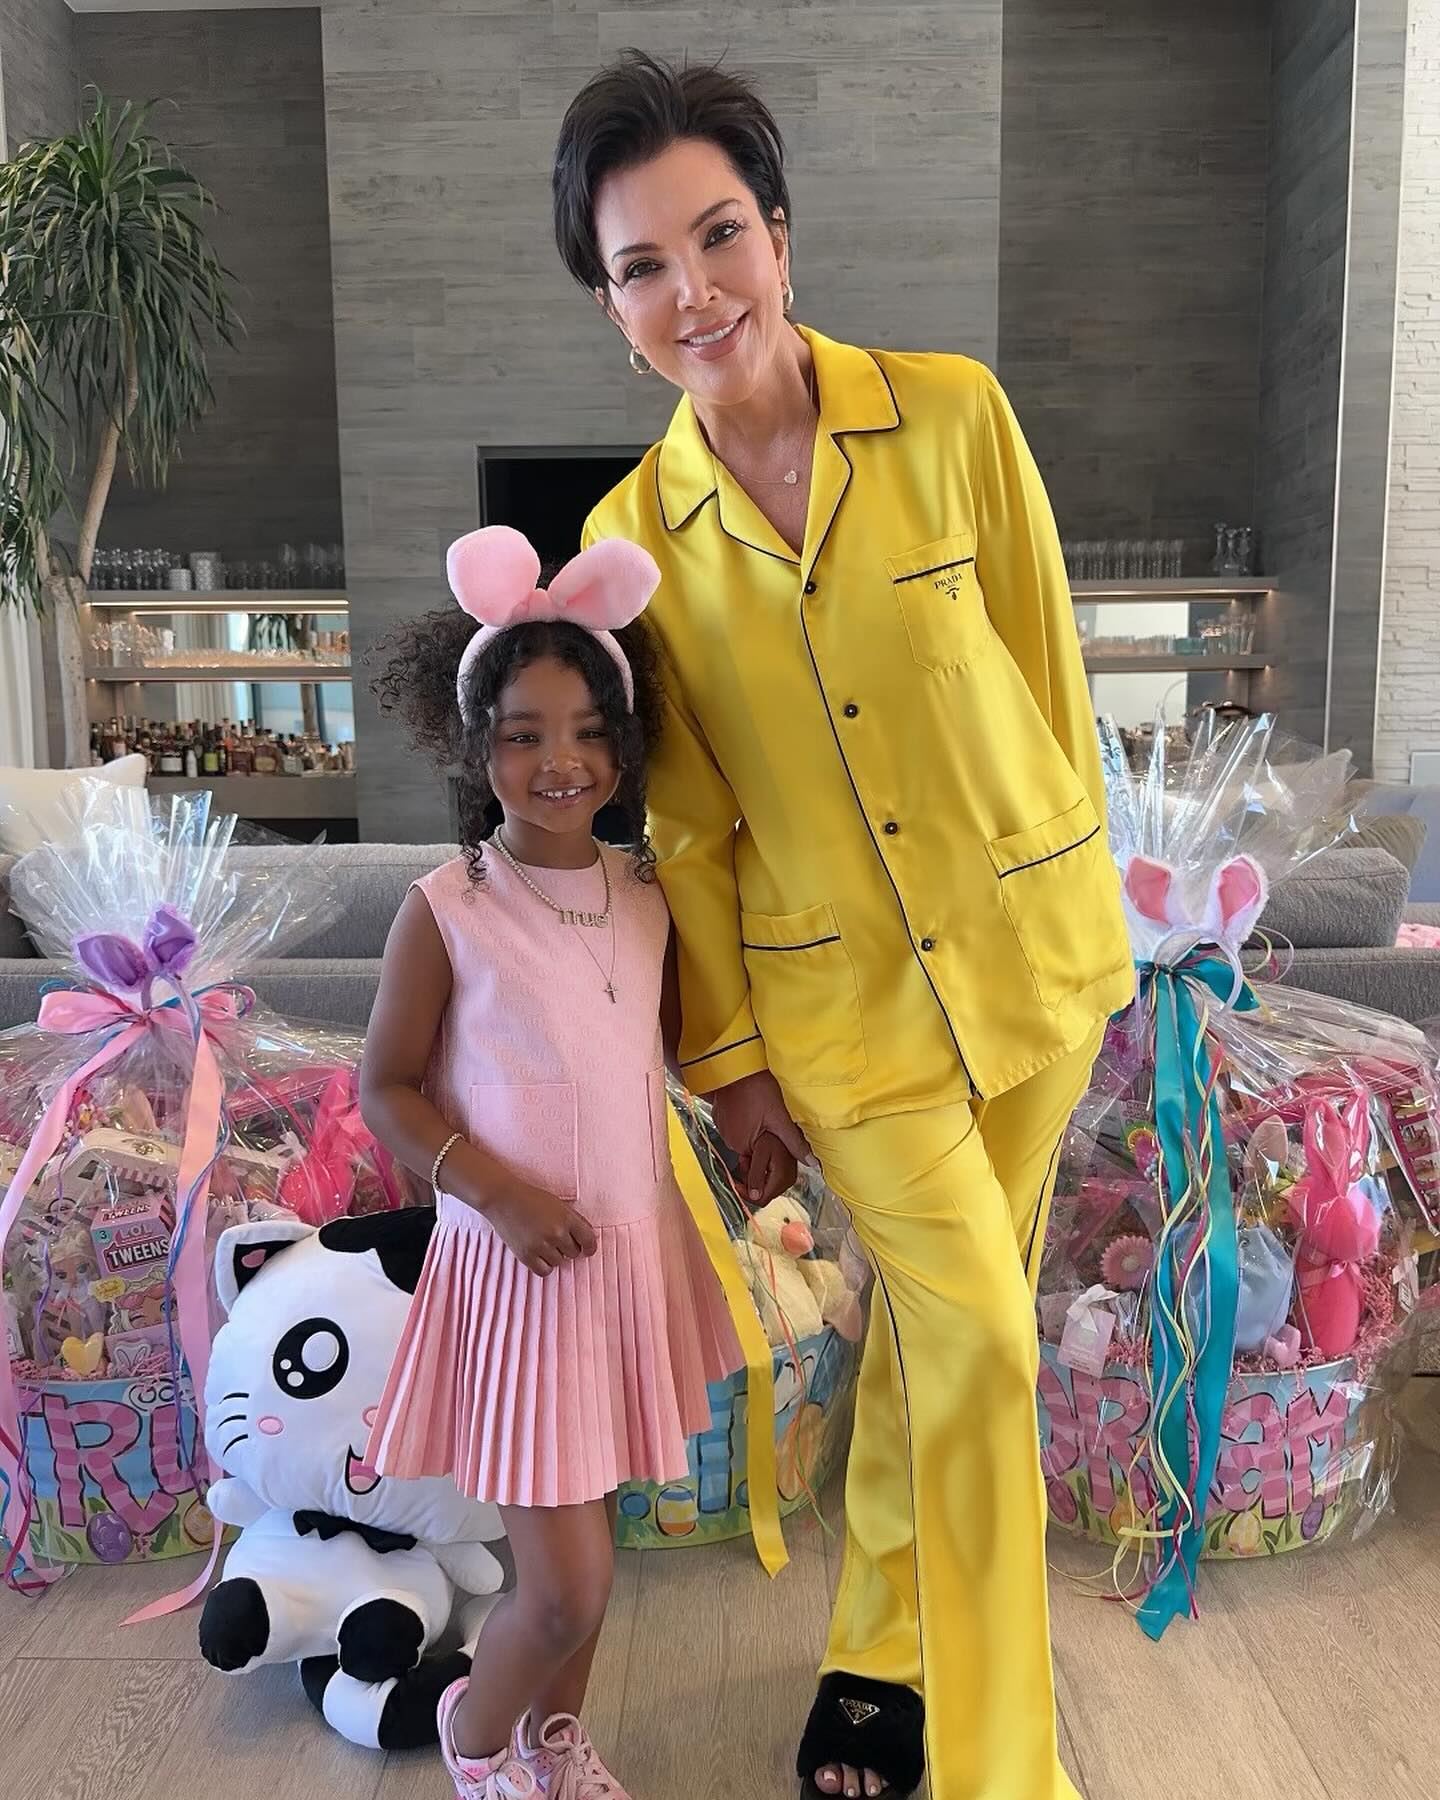 Kris displayed her slimmer figure while posing with granddaughter True Thompson